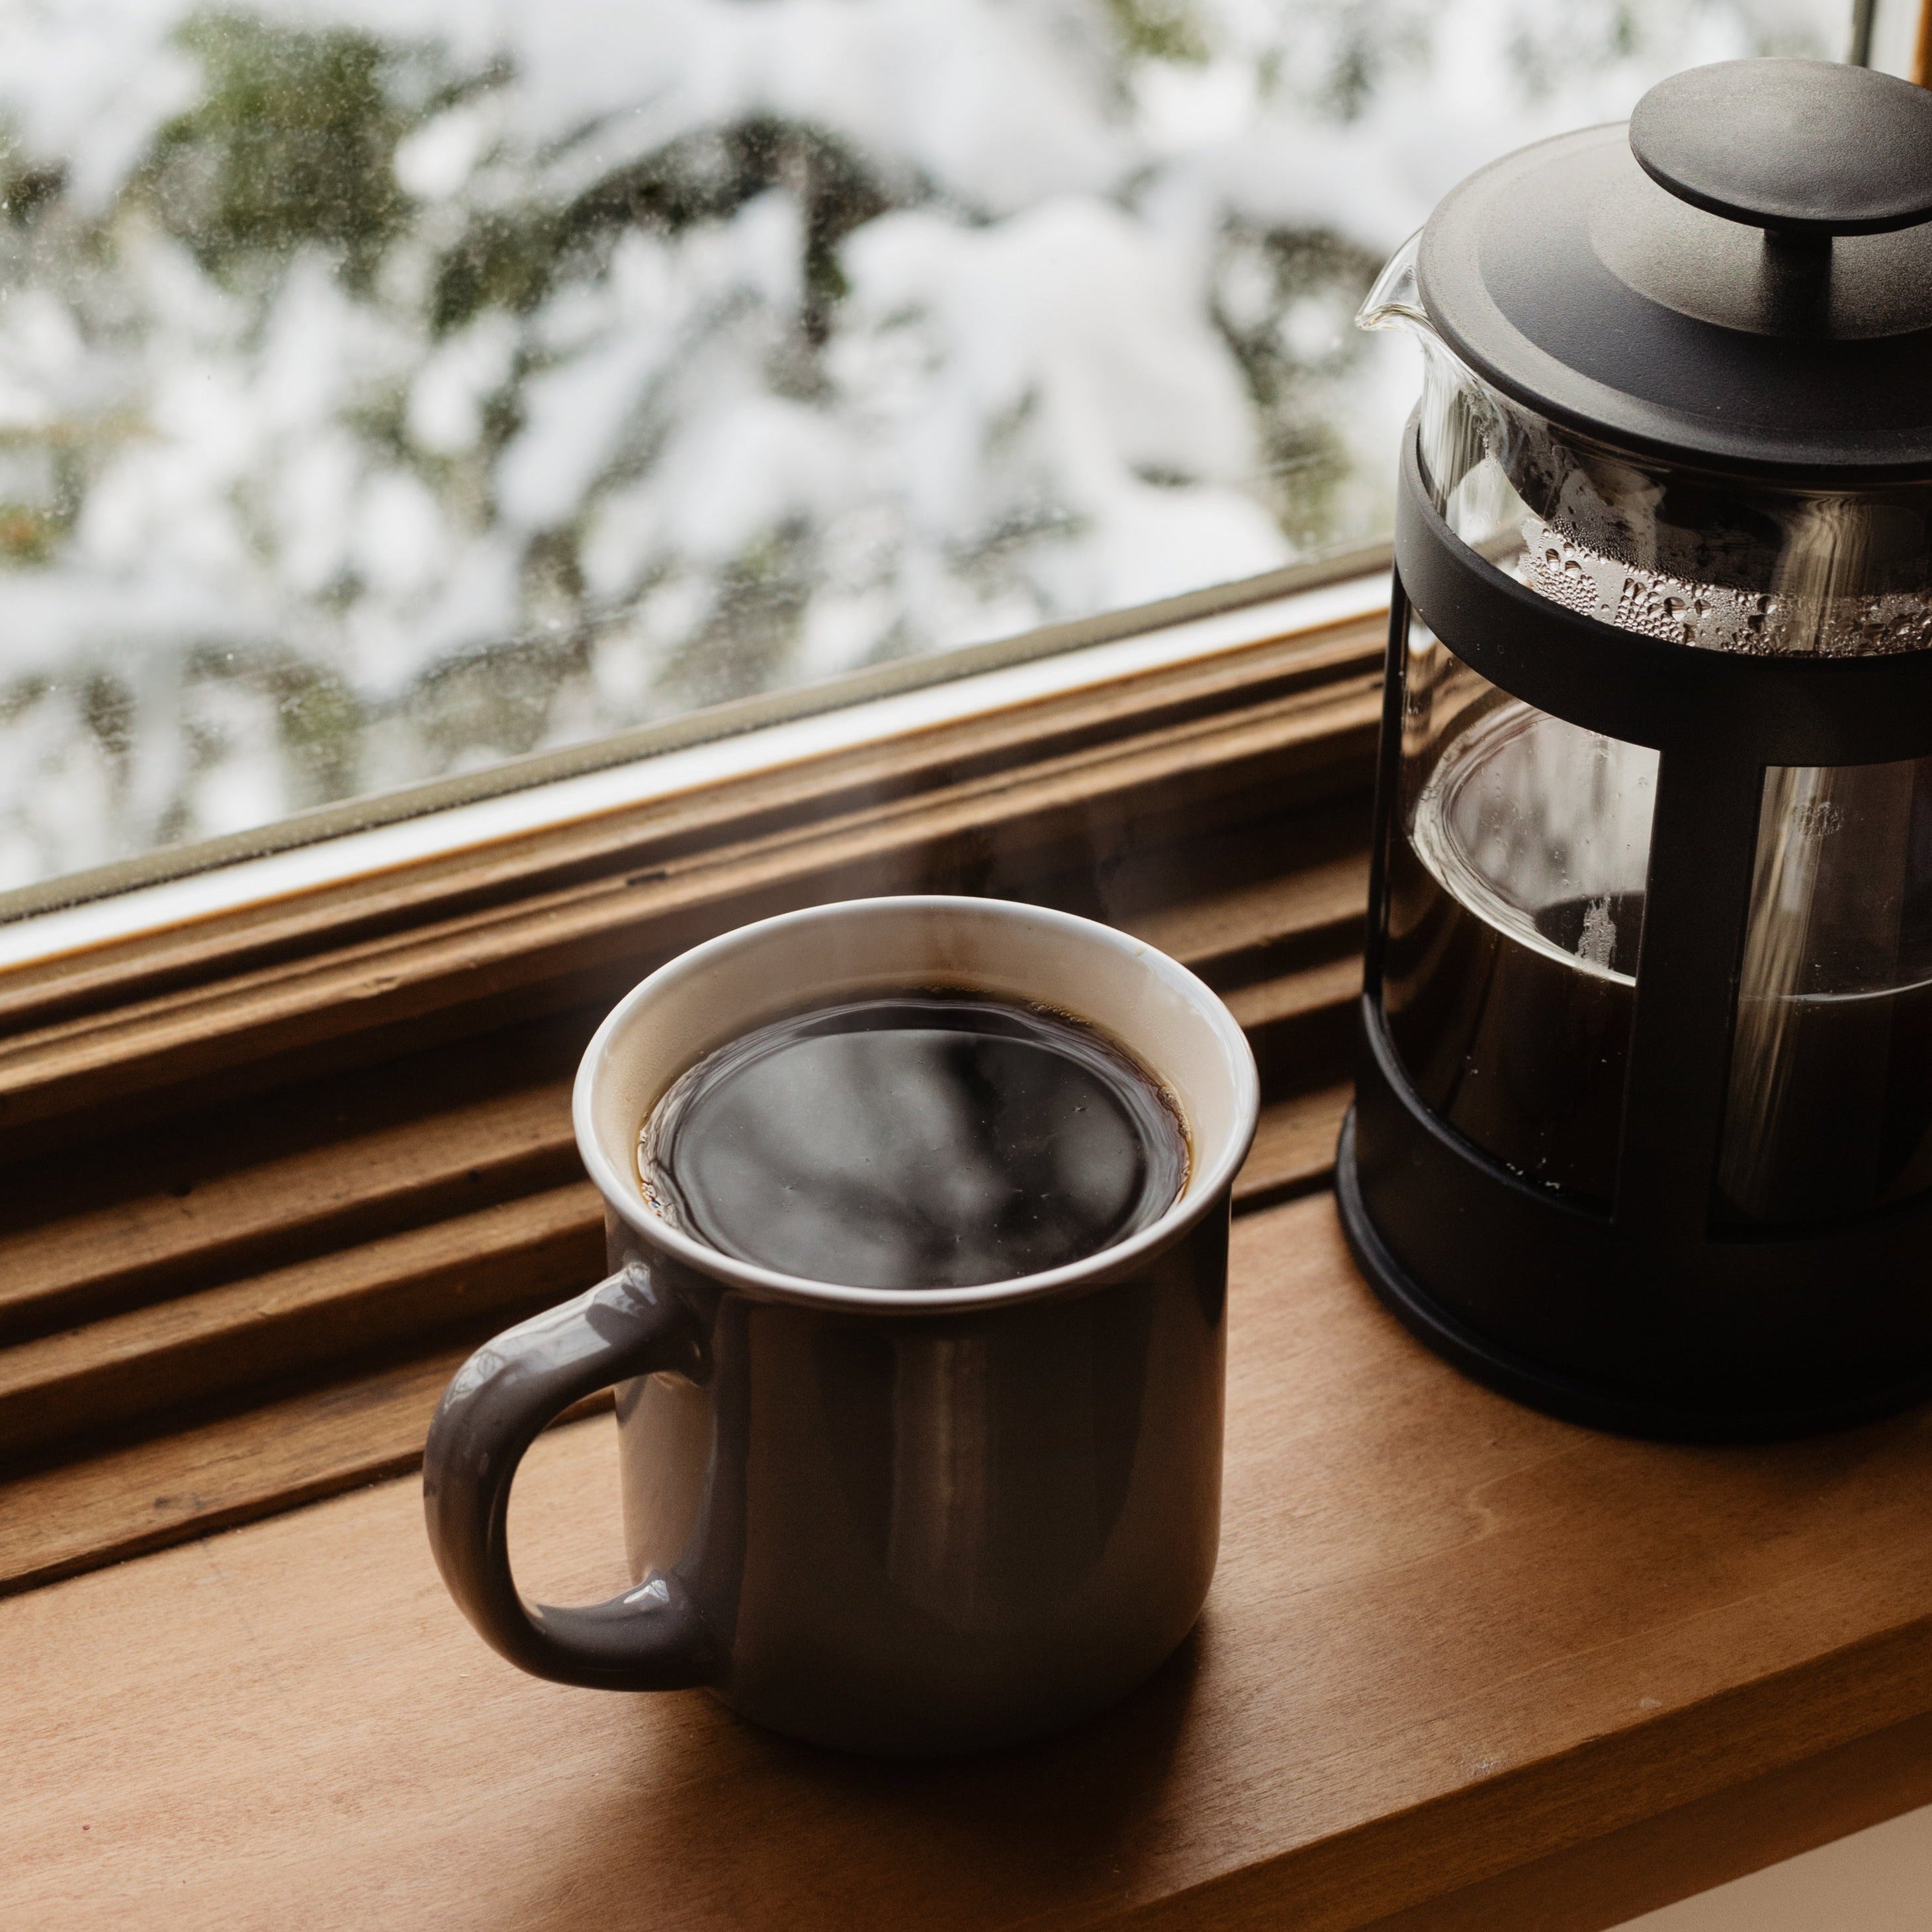 A fresh cup of coffee sits on a windowsill next to a french press coffeemaker.  The window is blurring the snowy scene behind.